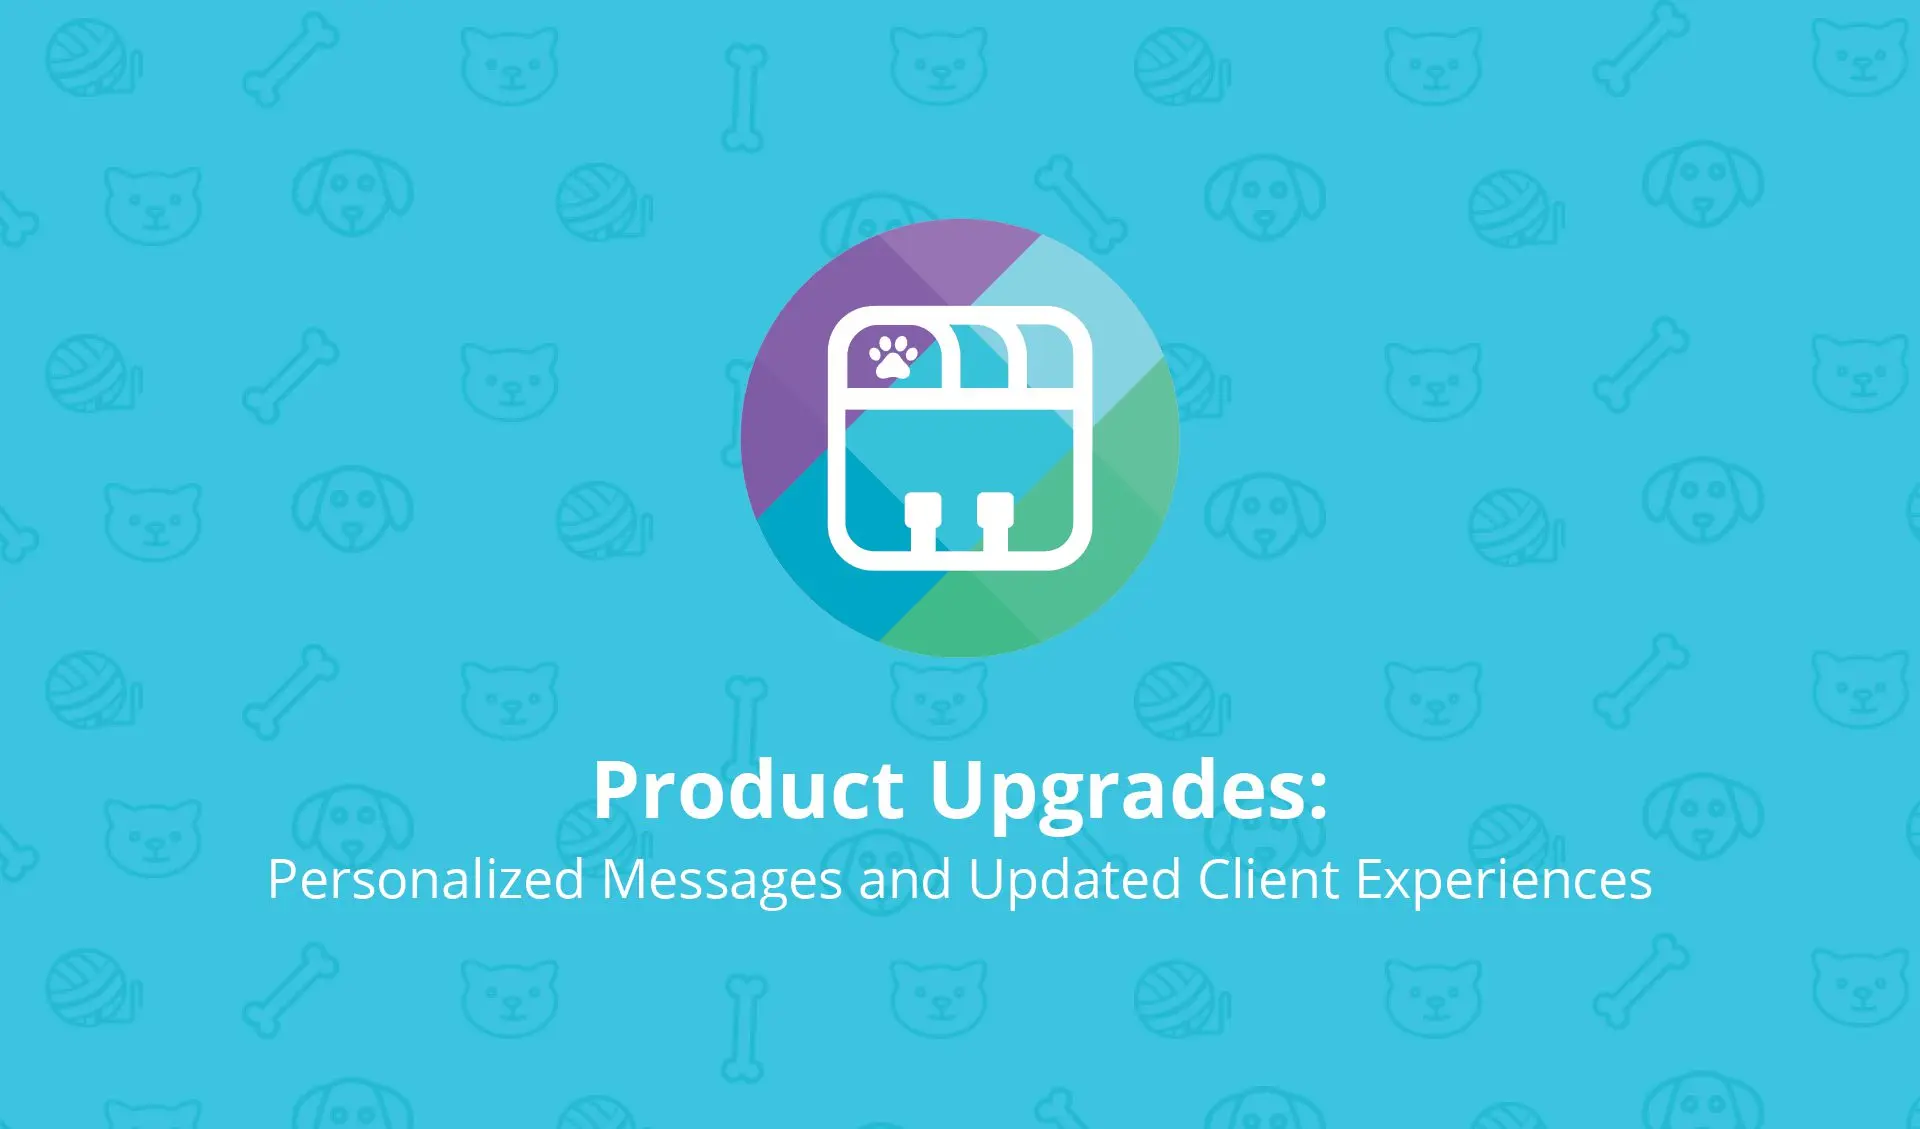 PetDesk Product Upgrades: Personalized Messages and Updated Client Experiences